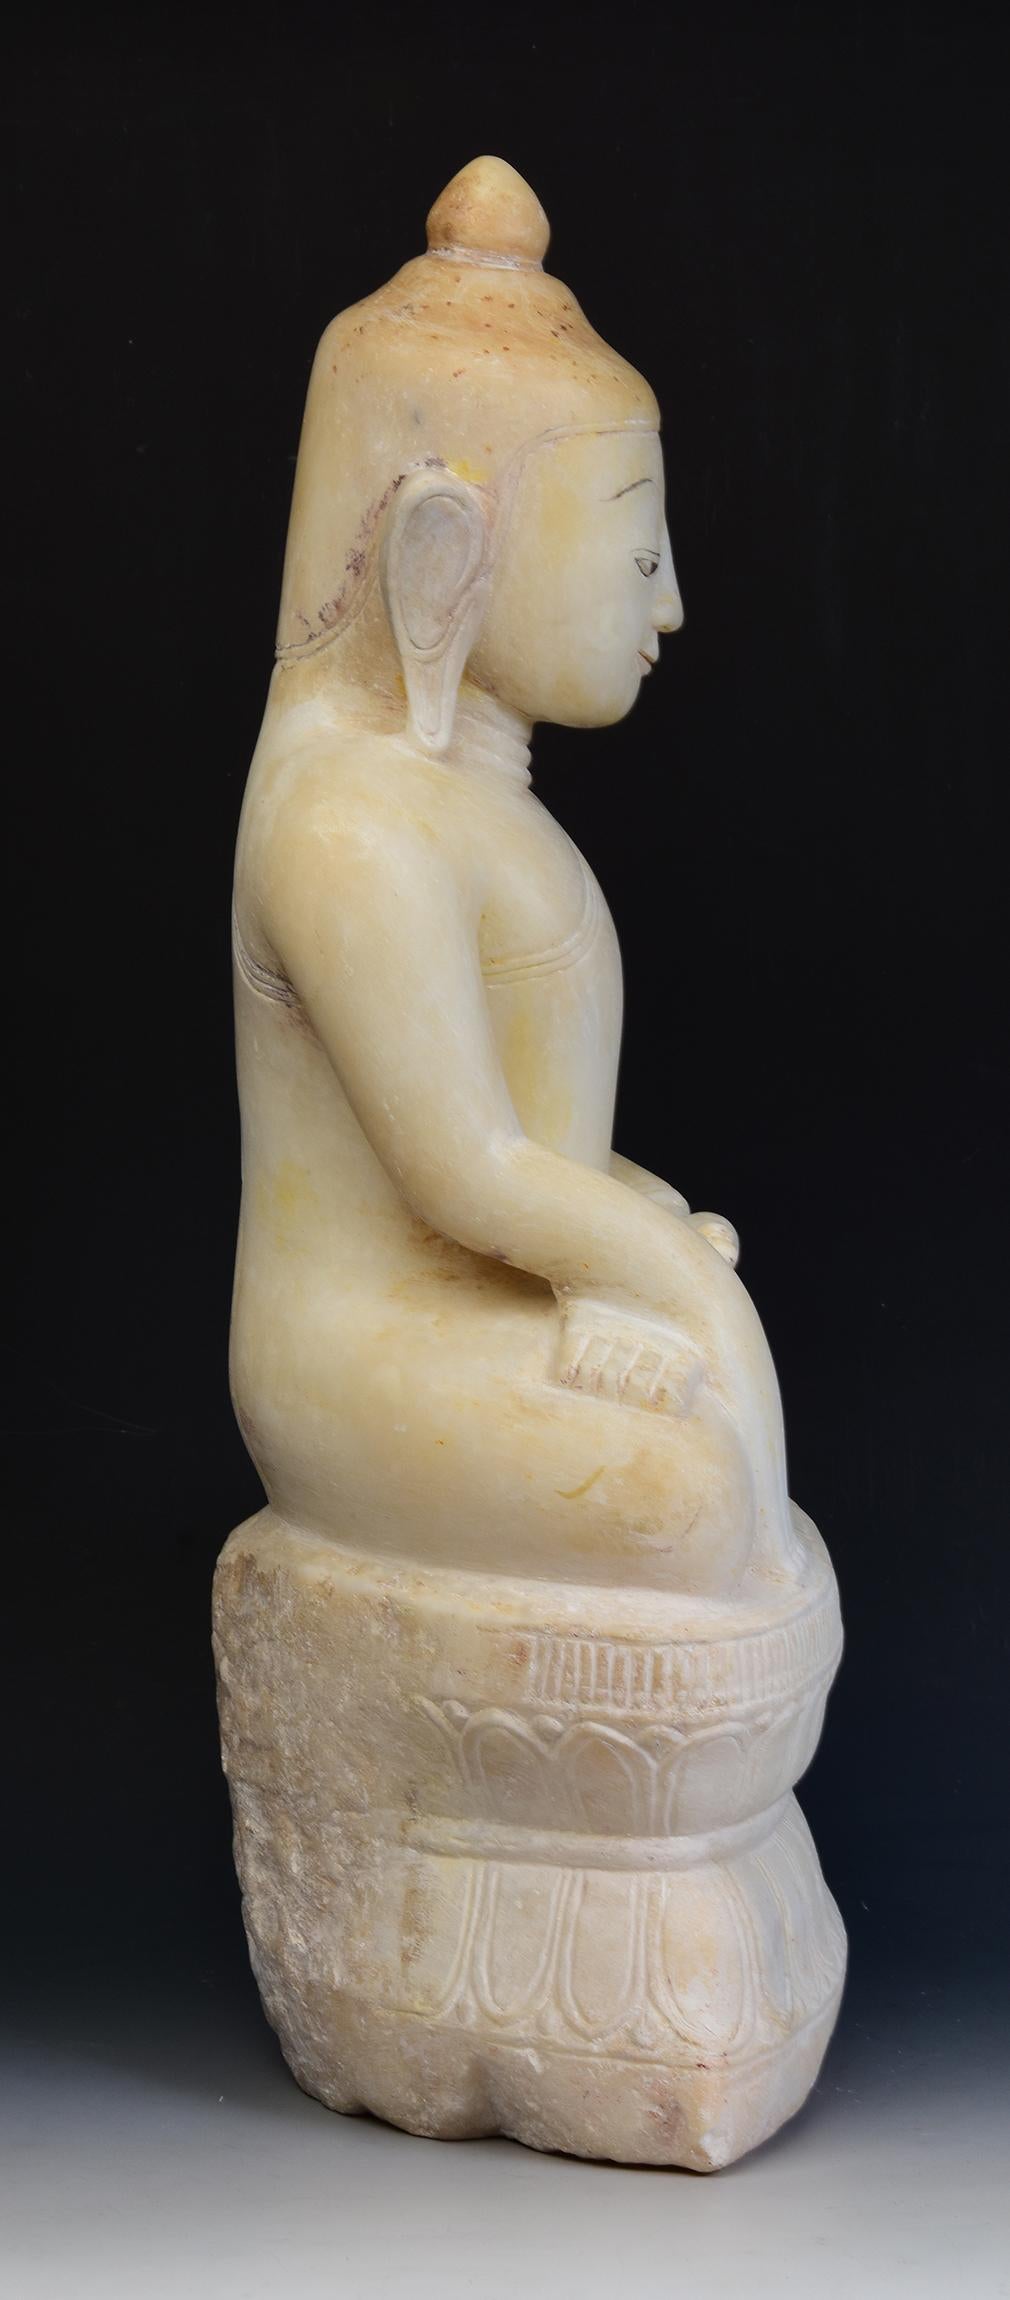 17th - 18th Century, Shan, Antique Burmese Alabaster Marble Seated Buddha Statue 10